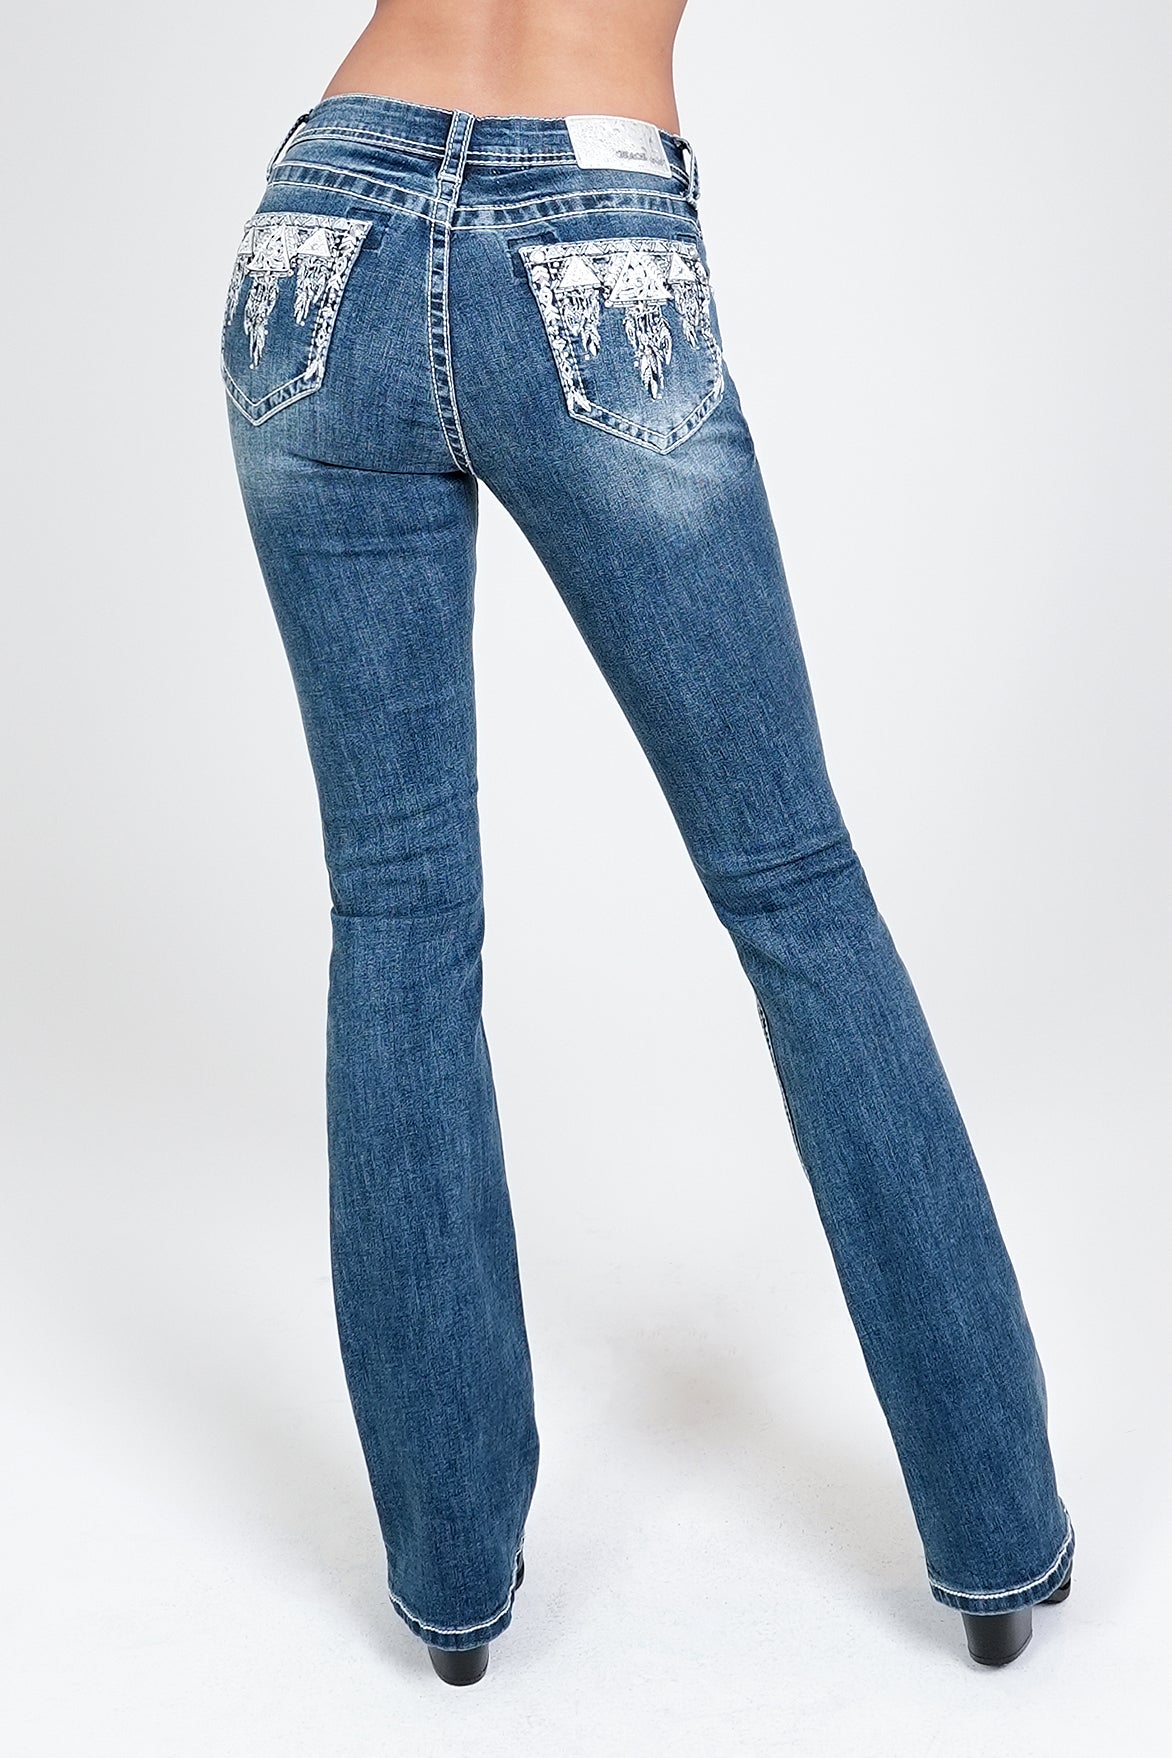 Aztec Modify Embellished Mid Rise Bootcut Jeans